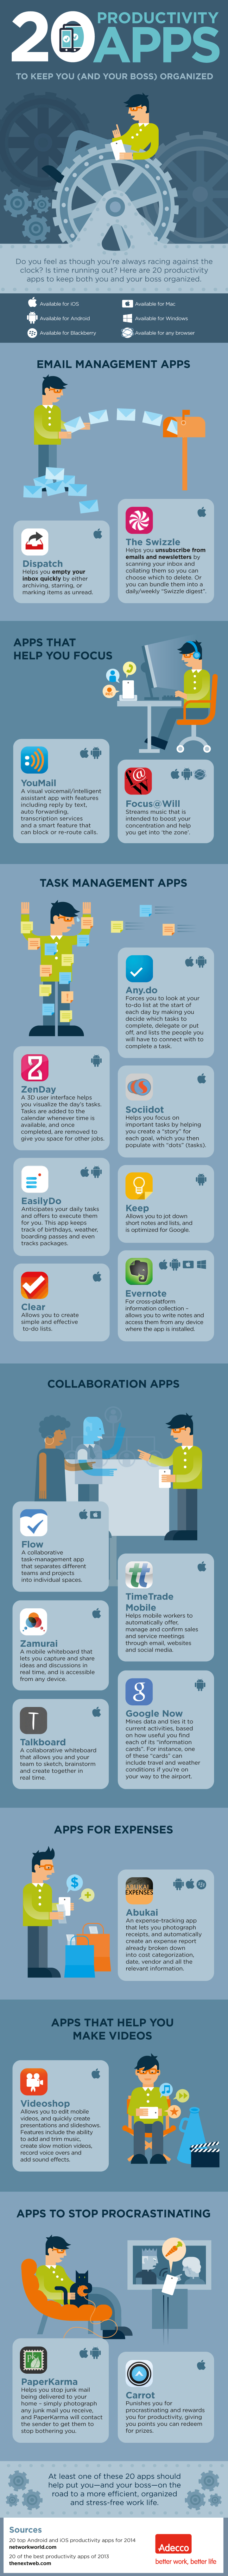 20 Productivity Apps To Keep You (And Your Boss) Organized